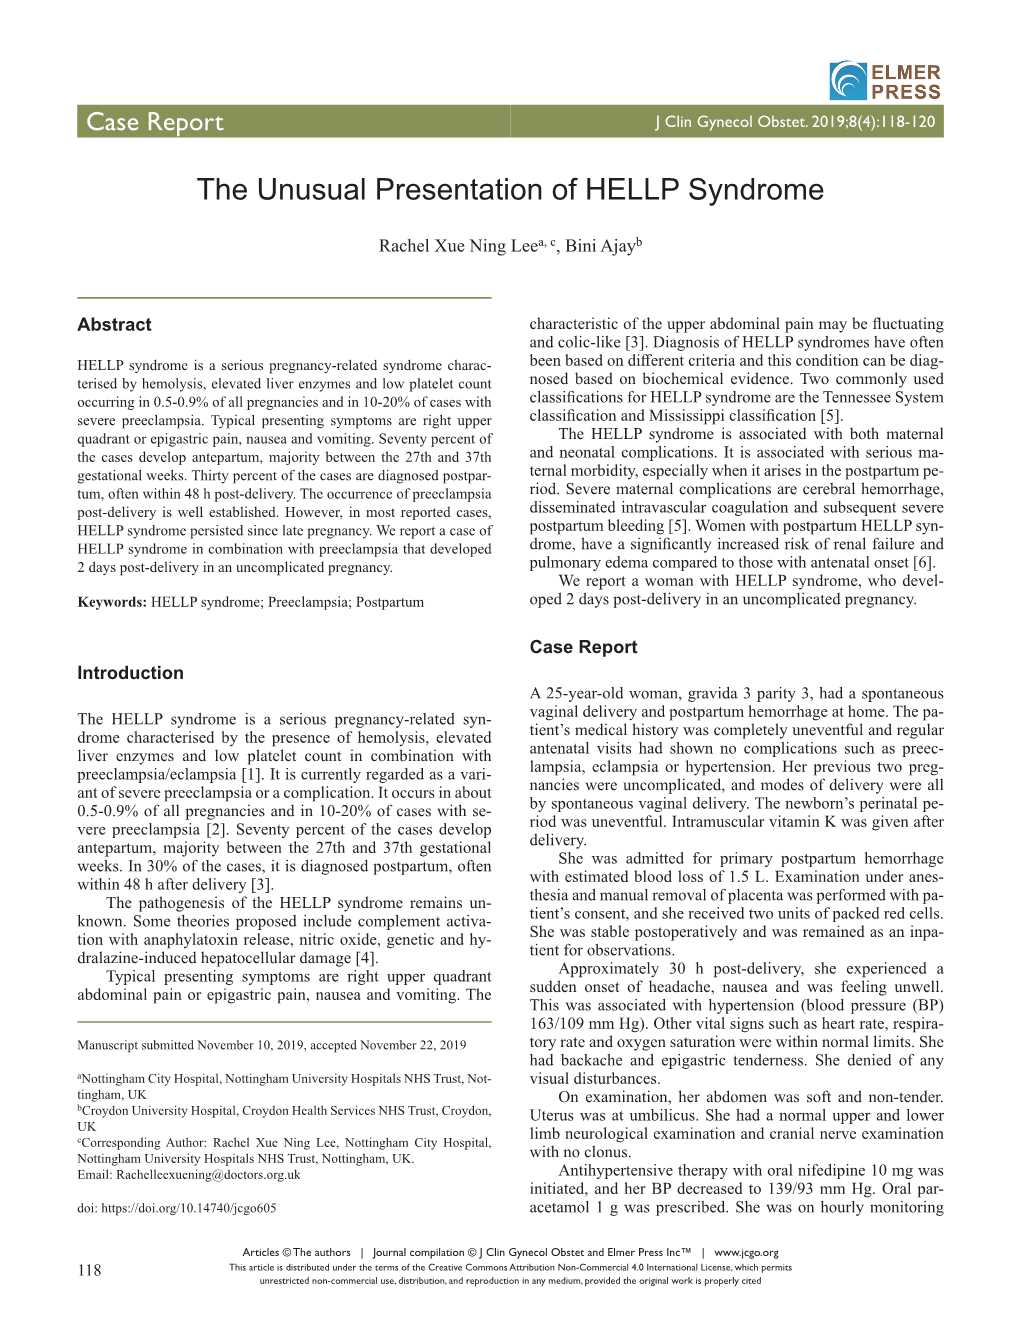 The Unusual Presentation of HELLP Syndrome